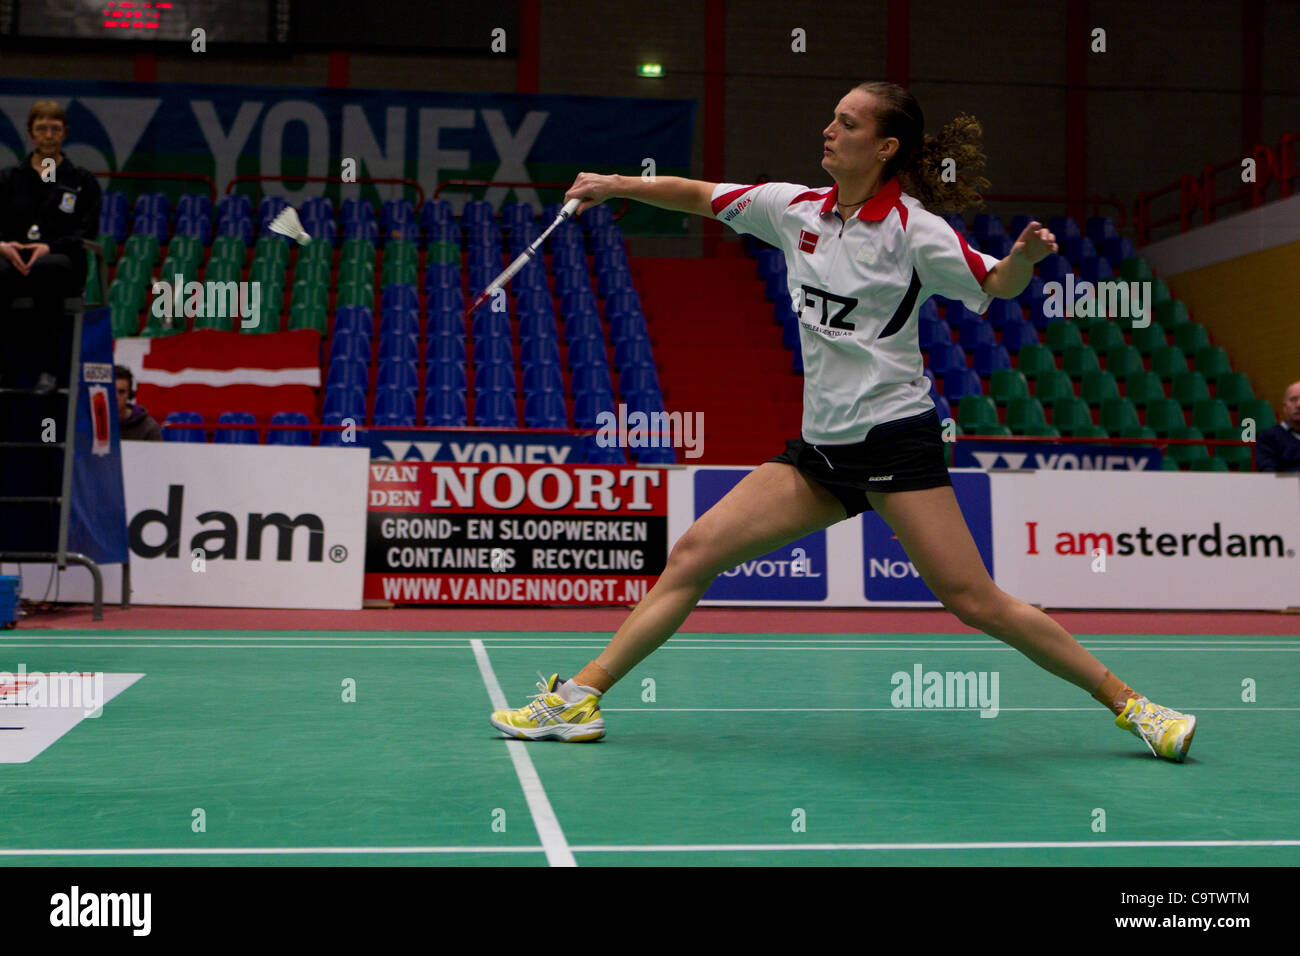 AMSTERDAM, THE NETHERLANDS, 19/02/2012. Badminton player Tine Baun  (Denmark, pictured) wins her match against Juliana Schenk (Germany) in the  finals of the European Team Championships Badminton 2012 in Amsterdam Stock  Photo - Alamy